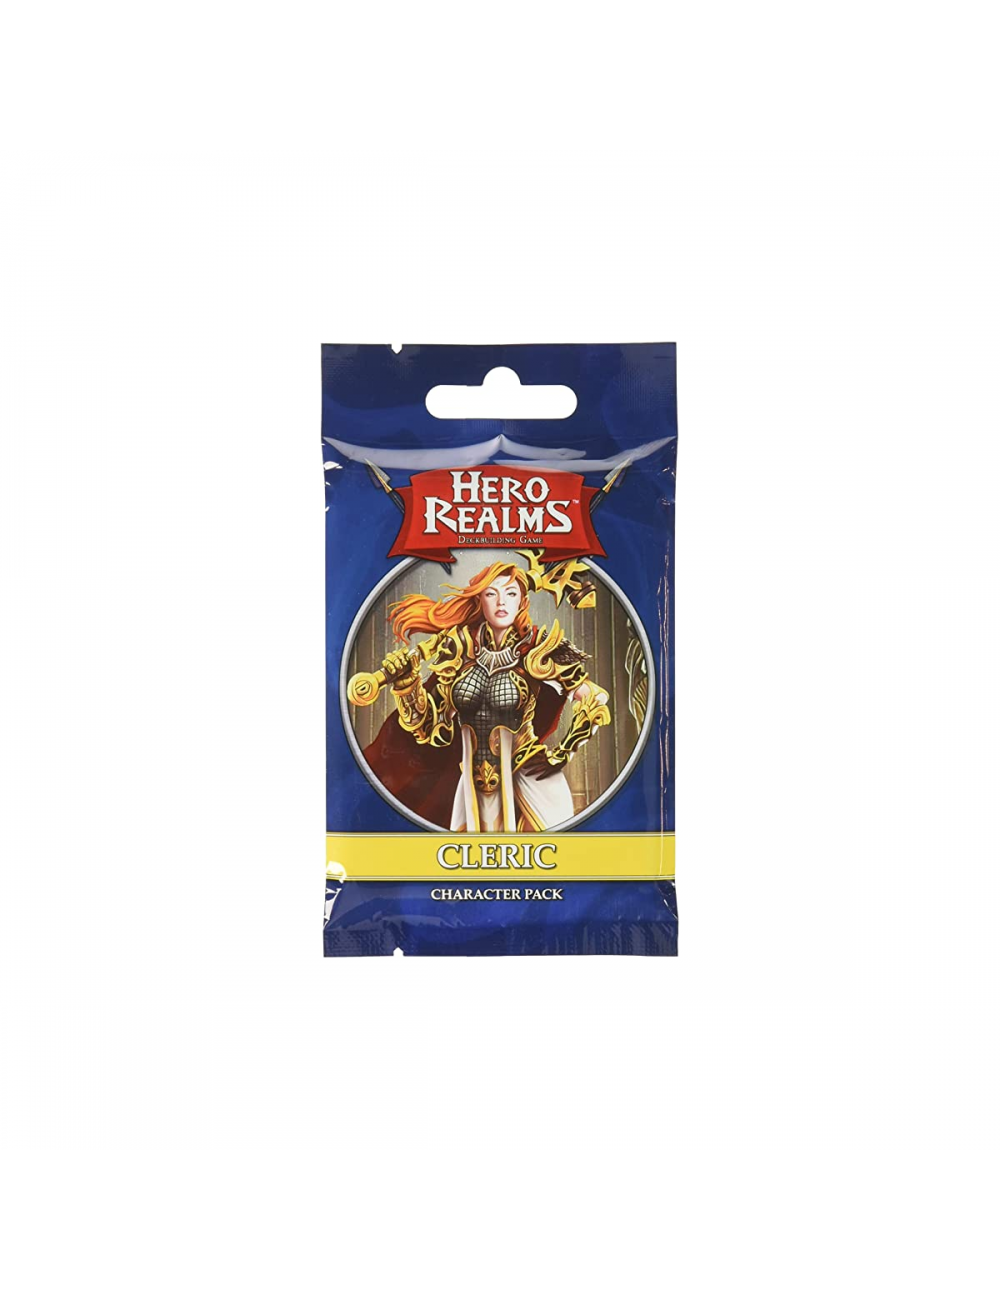 Hero Realms: Cleric Pack WITE613005275 White Wizard Games White Wizard Games